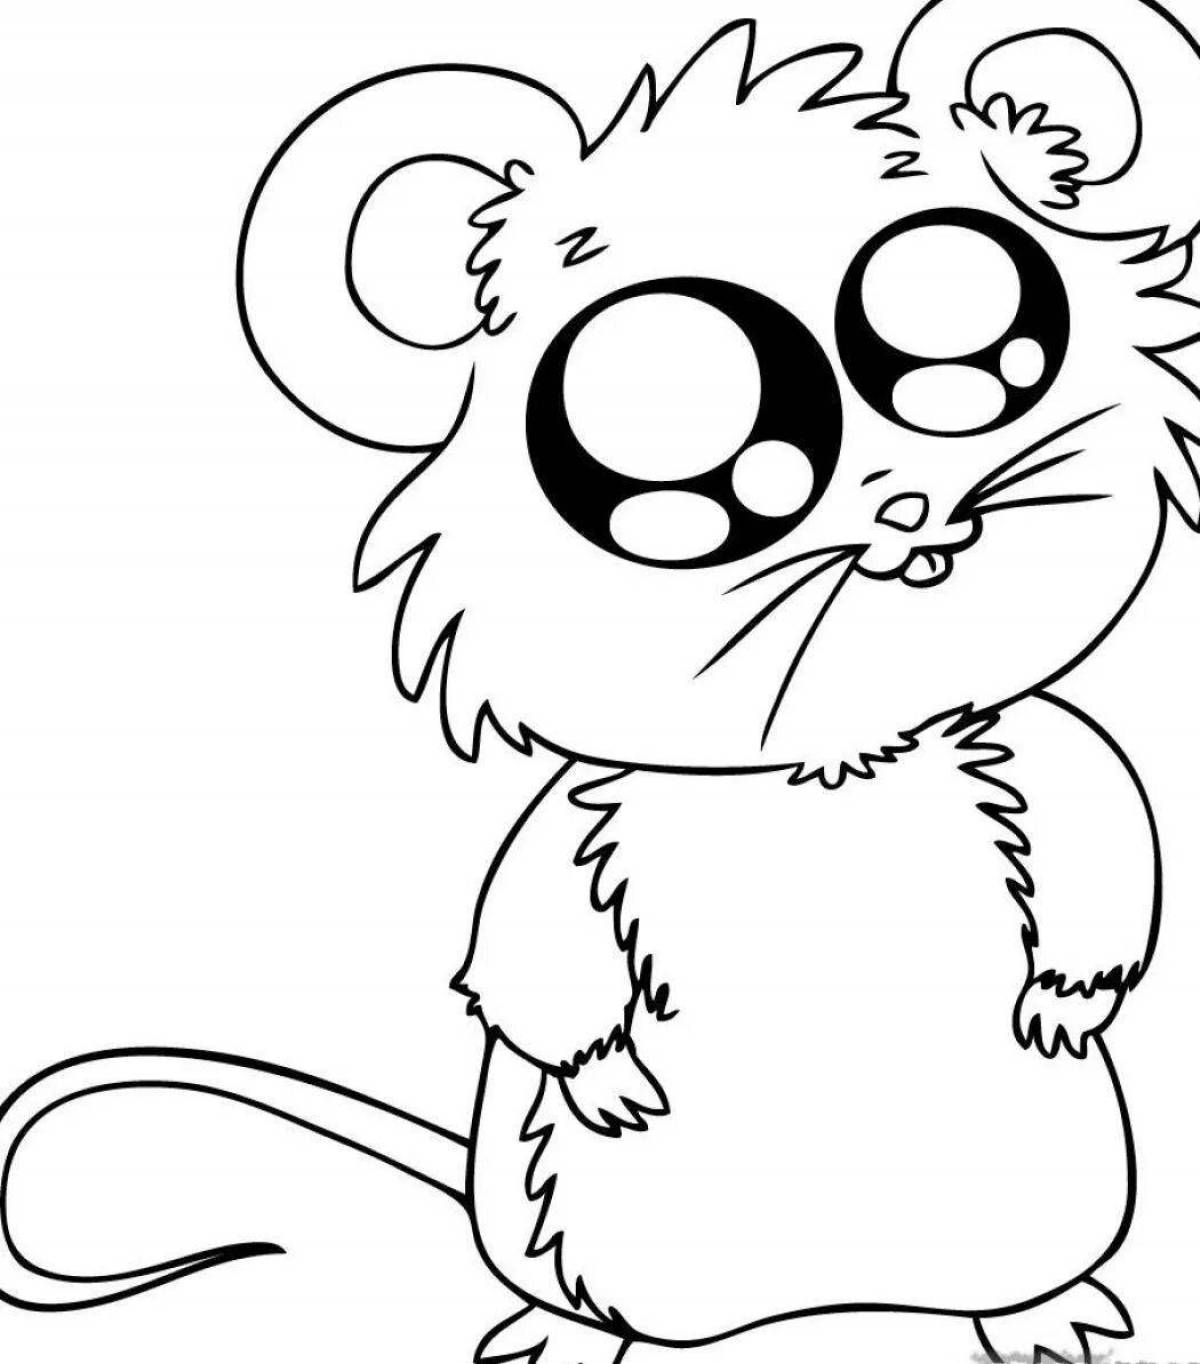 Amazing coloring pages for girls cute fluffies